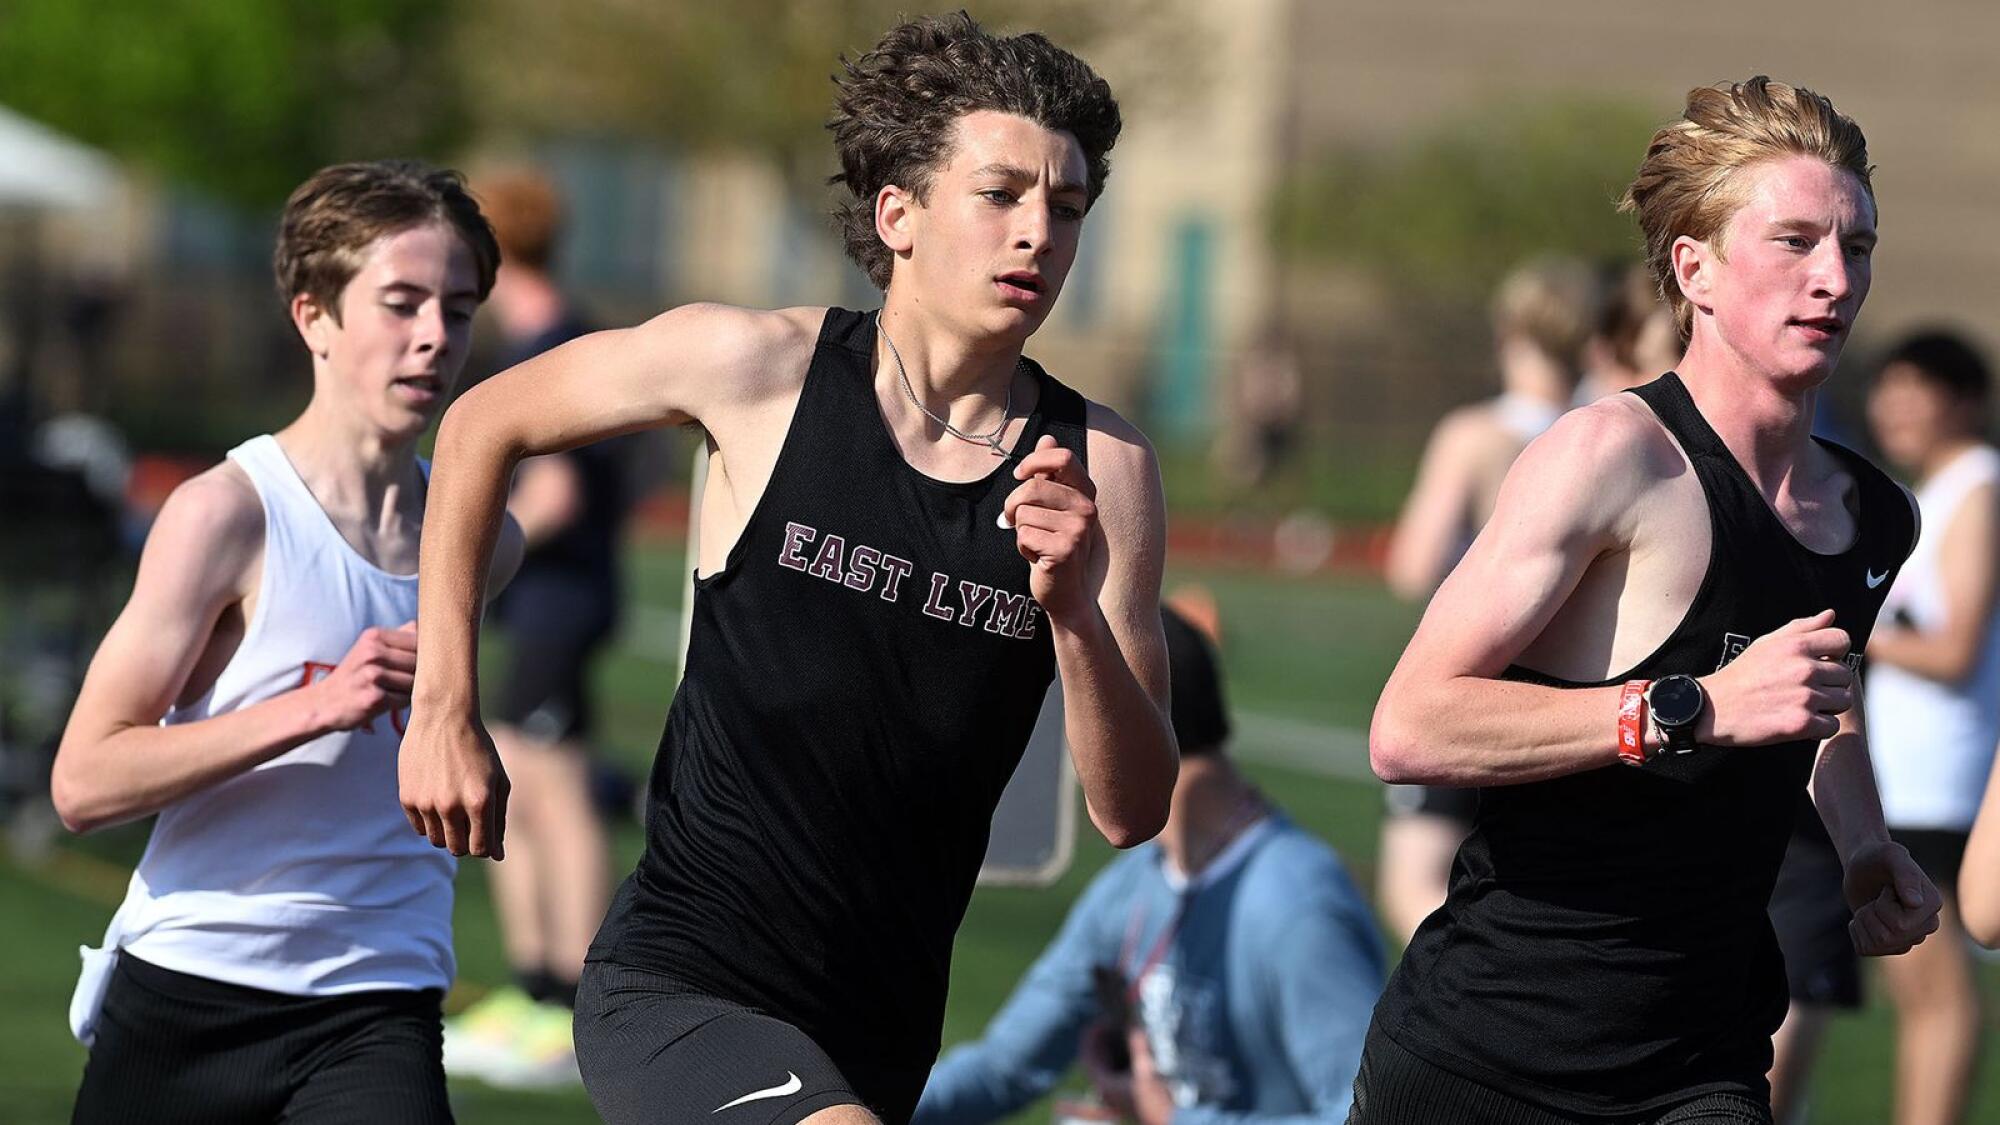 East Lyme heats up at just the right moment to earn Division I title over Fitch in boys’ track